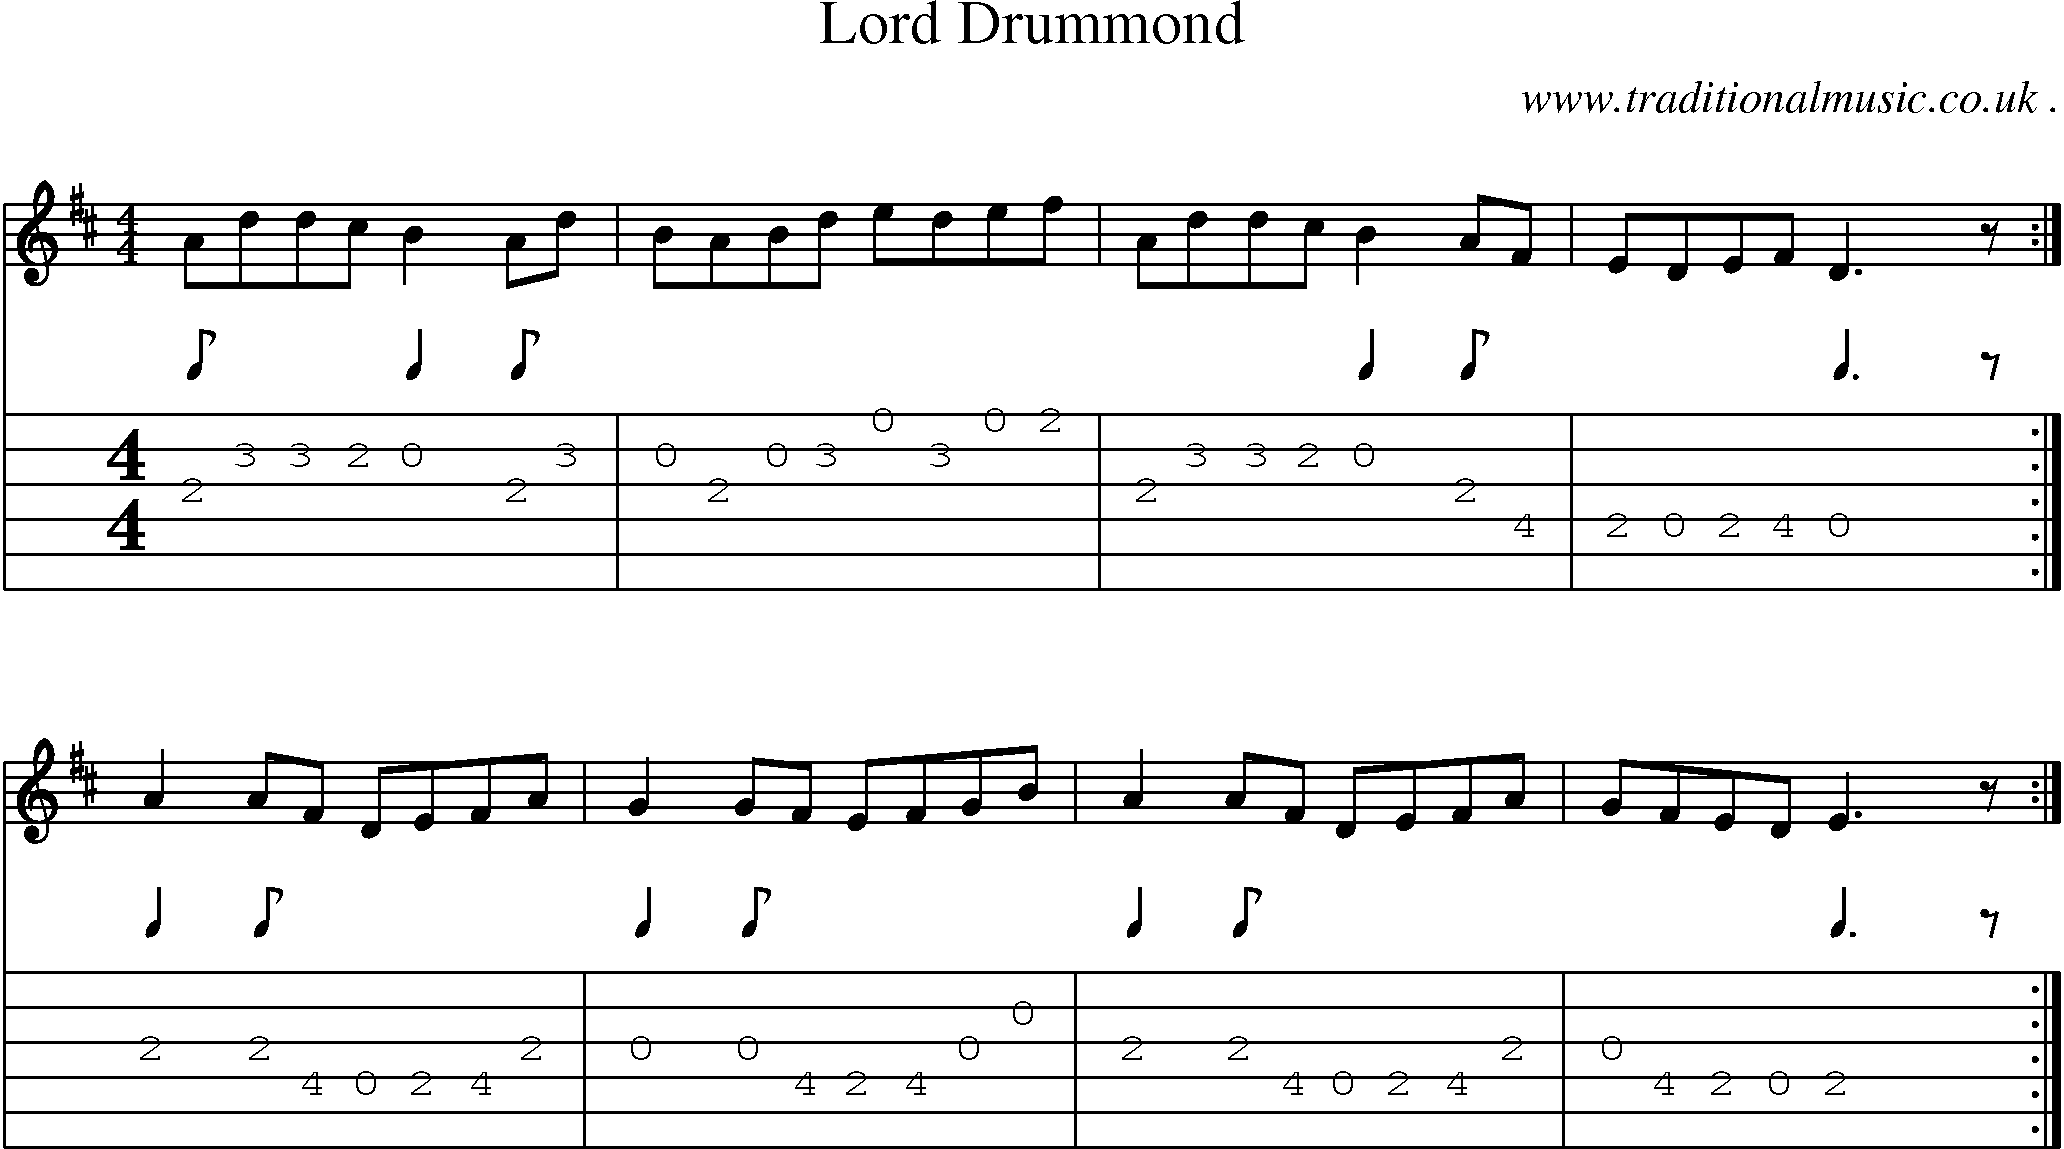 Sheet-music  score, Chords and Guitar Tabs for Lord Drummond